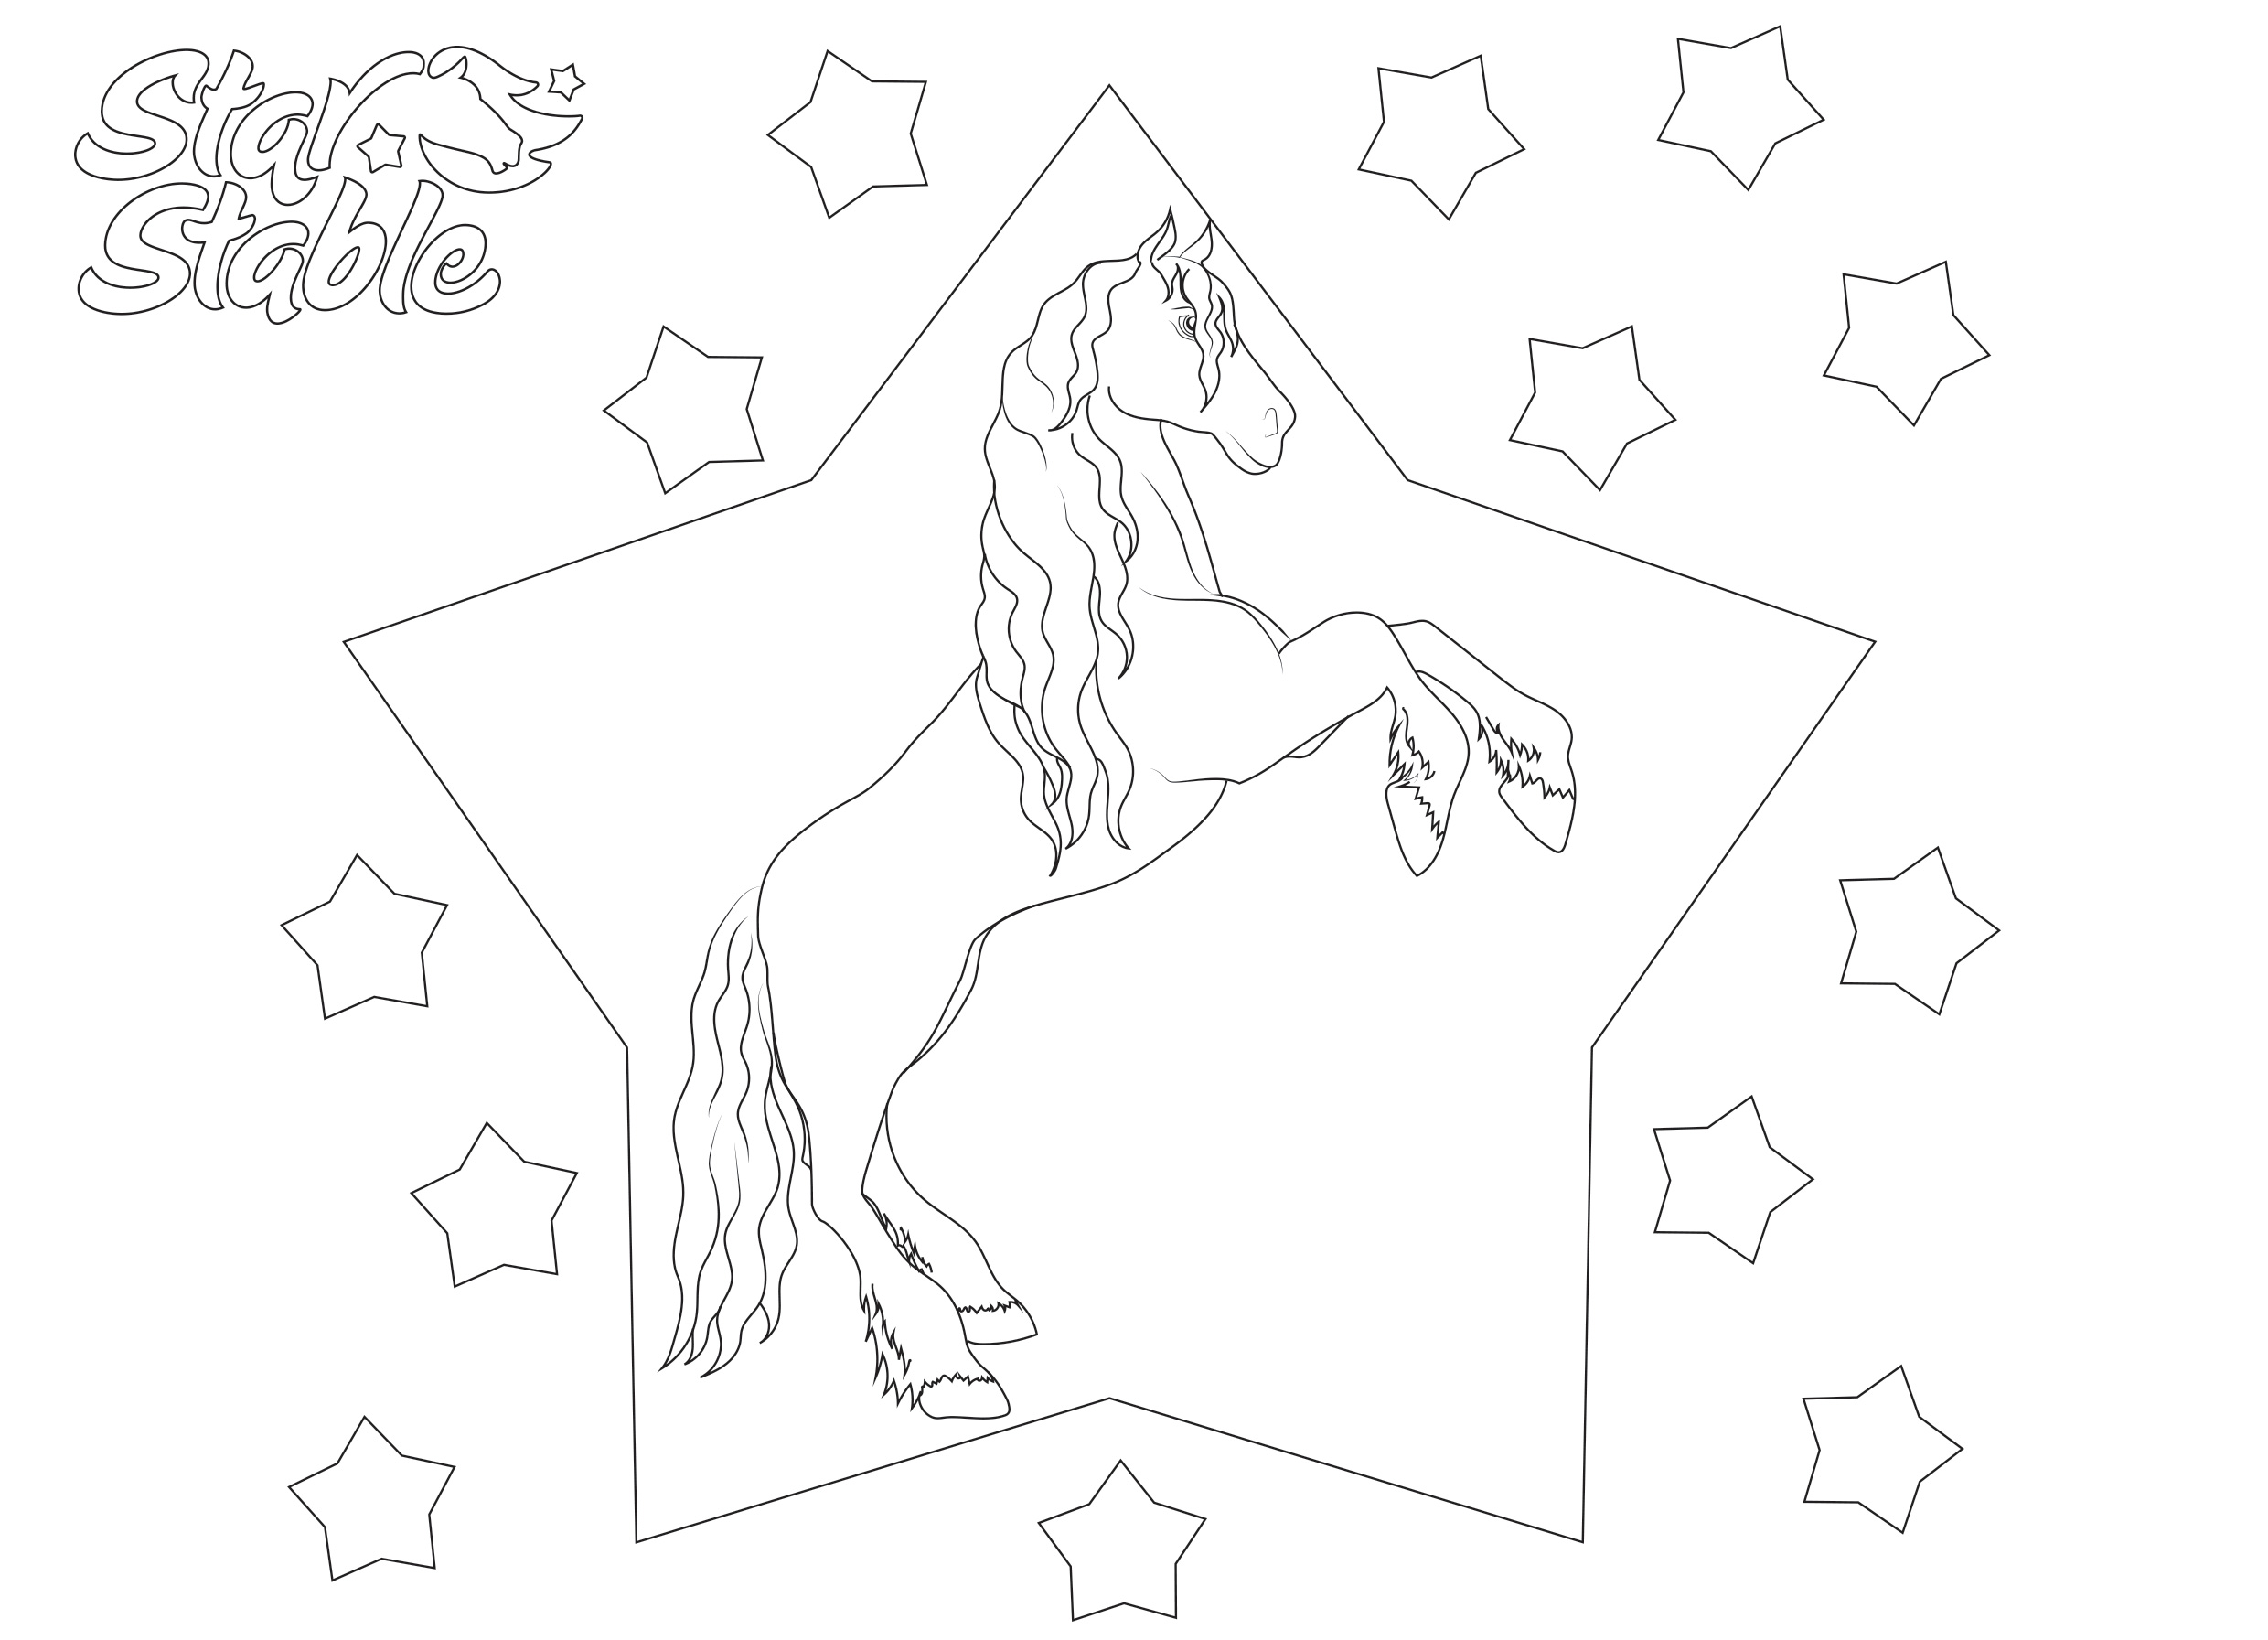 Coloring uplifting star stable